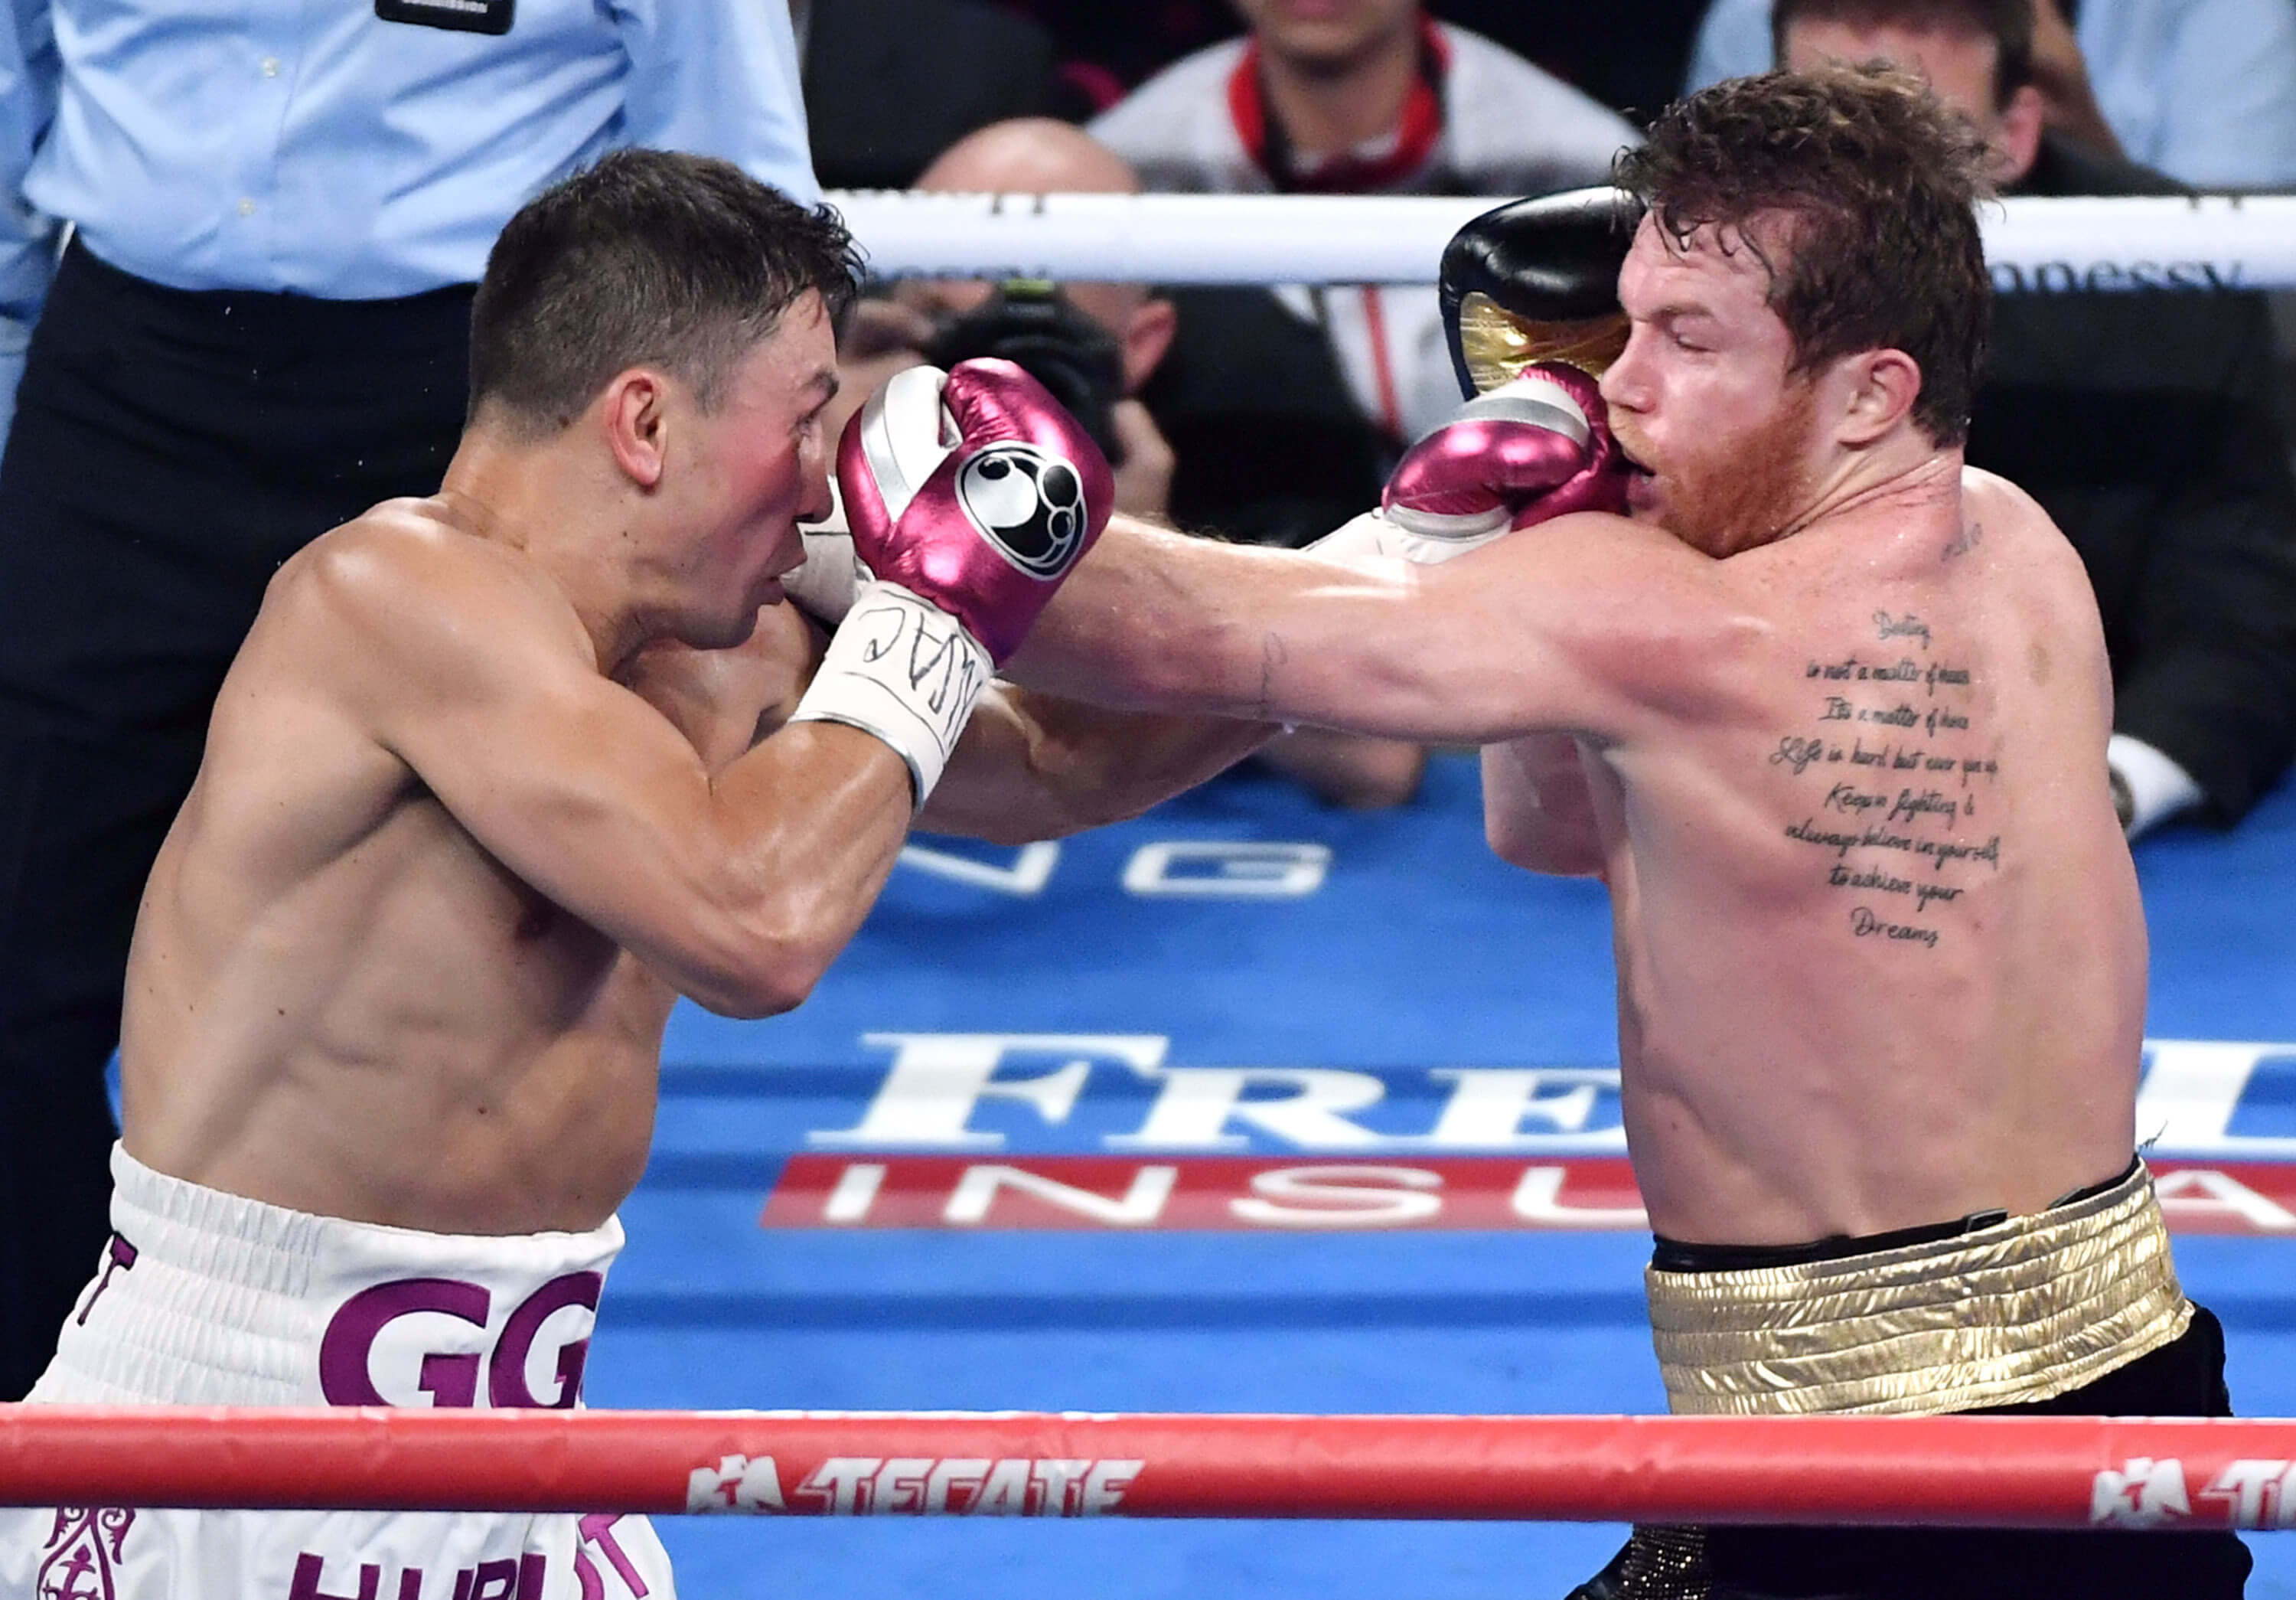 Gennady Golovkin, left, and Canelo Alvarez battle in the second round of their WBC/WBA middleweight title fight Saturday in Las Vegas, Nevada. Alvarez won by majority decision.